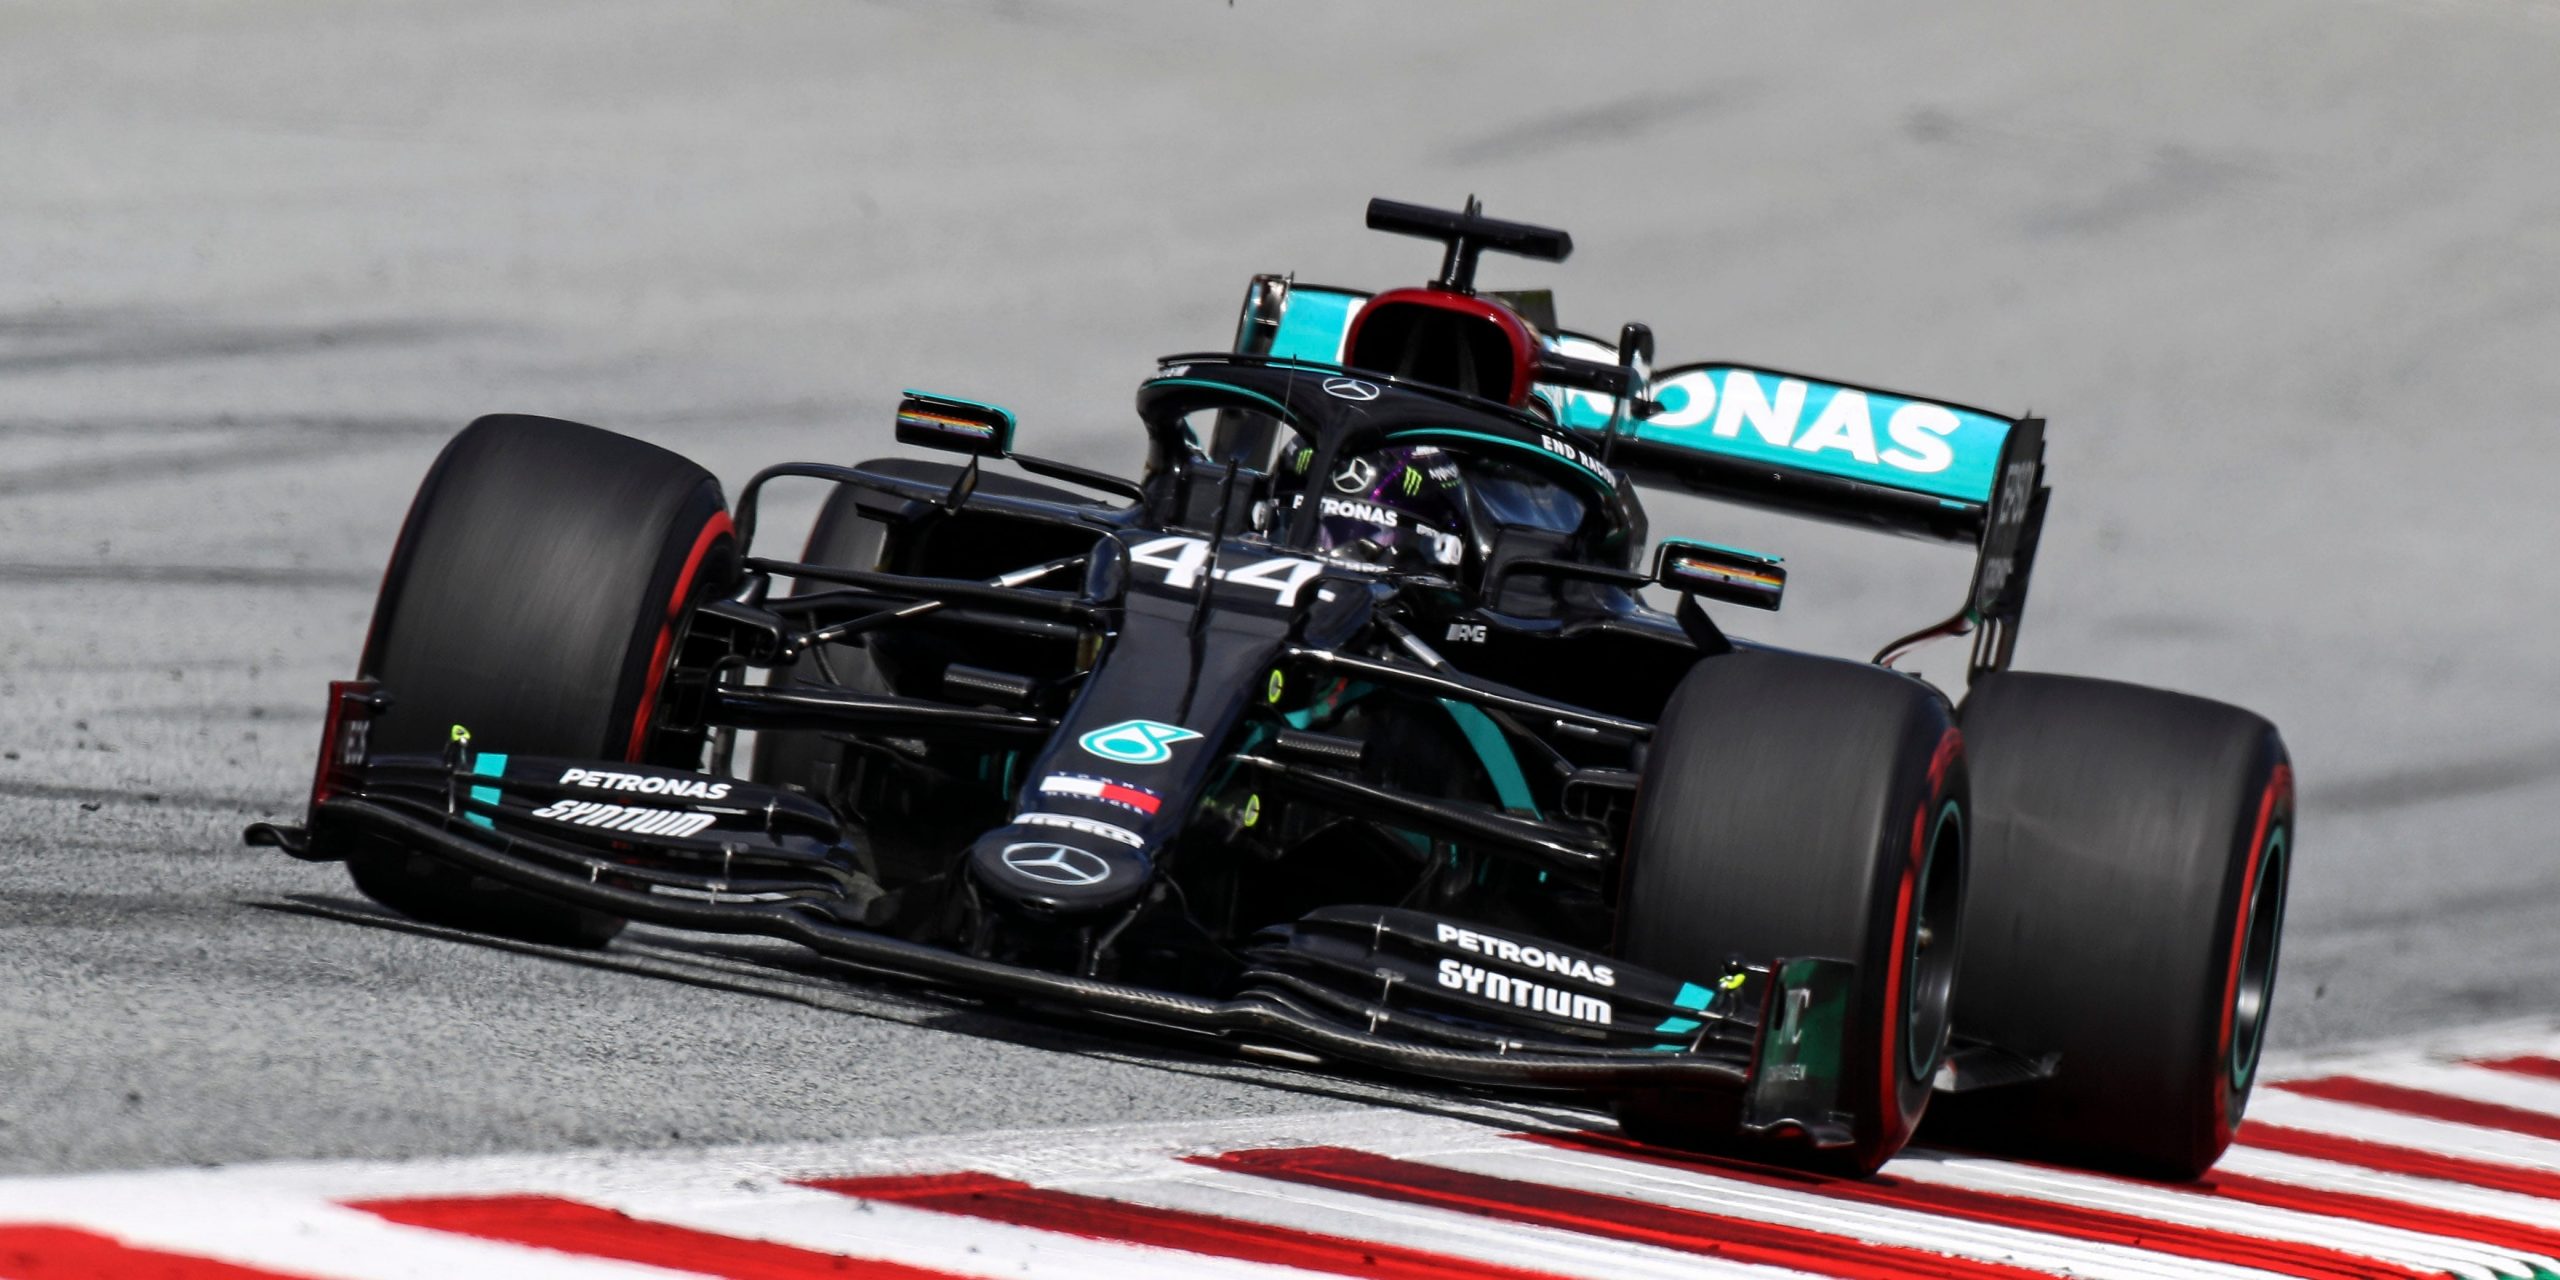 Mercedes driver Lewis Hamilton of Britain steers his car during the Styrian Formula One Grand Prix race at the Red Bull Ring racetrack in Spielberg, Austria, Sunday, July 12, 2020. (Mark Thompson/Pool via AP)